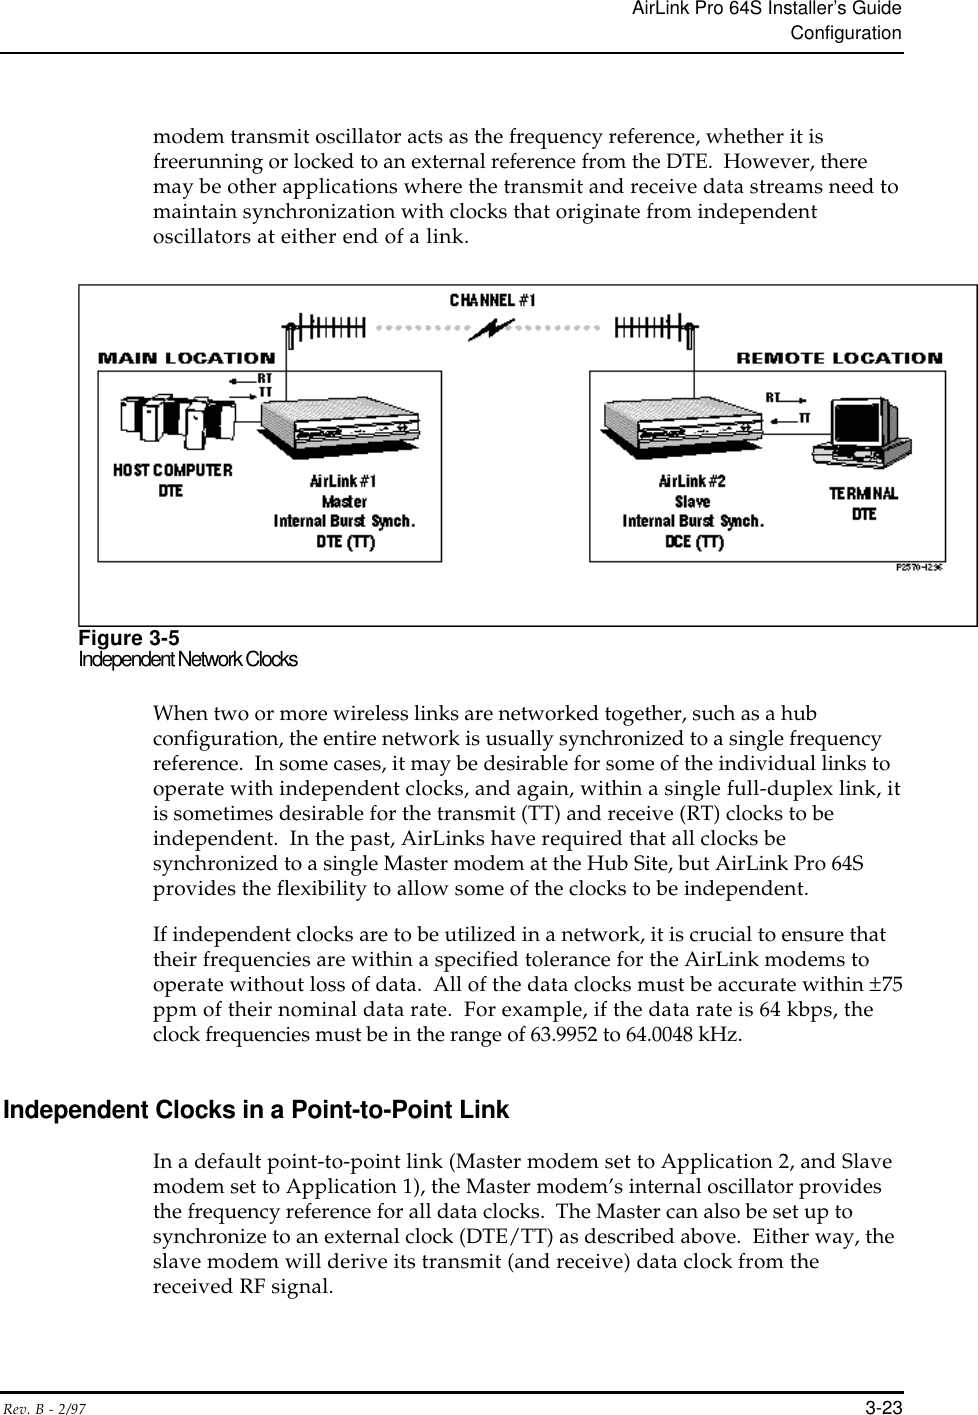 AirLink Pro 64S Installer’s GuideConfigurationRev. B - 2/97 3-23modem transmit oscillator acts as the frequency reference, whether it isfreerunning or locked to an external reference from the DTE.  However, theremay be other applications where the transmit and receive data streams need tomaintain synchronization with clocks that originate from independentoscillators at either end of a link.Figure 3-5Independent Network ClocksWhen two or more wireless links are networked together, such as a hubconfiguration, the entire network is usually synchronized to a single frequencyreference.  In some cases, it may be desirable for some of the individual links tooperate with independent clocks, and again, within a single full-duplex link, itis sometimes desirable for the transmit (TT) and receive (RT) clocks to beindependent.  In the past, AirLinks have required that all clocks besynchronized to a single Master modem at the Hub Site, but AirLink Pro 64Sprovides the flexibility to allow some of the clocks to be independent.If independent clocks are to be utilized in a network, it is crucial to ensure thattheir frequencies are within a specified tolerance for the AirLink modems tooperate without loss of data.  All of the data clocks must be accurate within ±75ppm of their nominal data rate.  For example, if the data rate is 64 kbps, theclock frequencies must be in the range of 63.9952 to 64.0048 kHz.Independent Clocks in a Point-to-Point LinkIn a default point-to-point link (Master modem set to Application 2, and Slavemodem set to Application 1), the Master modem’s internal oscillator providesthe frequency reference for all data clocks.  The Master can also be set up tosynchronize to an external clock (DTE/TT) as described above.  Either way, theslave modem will derive its transmit (and receive) data clock from thereceived RF signal.